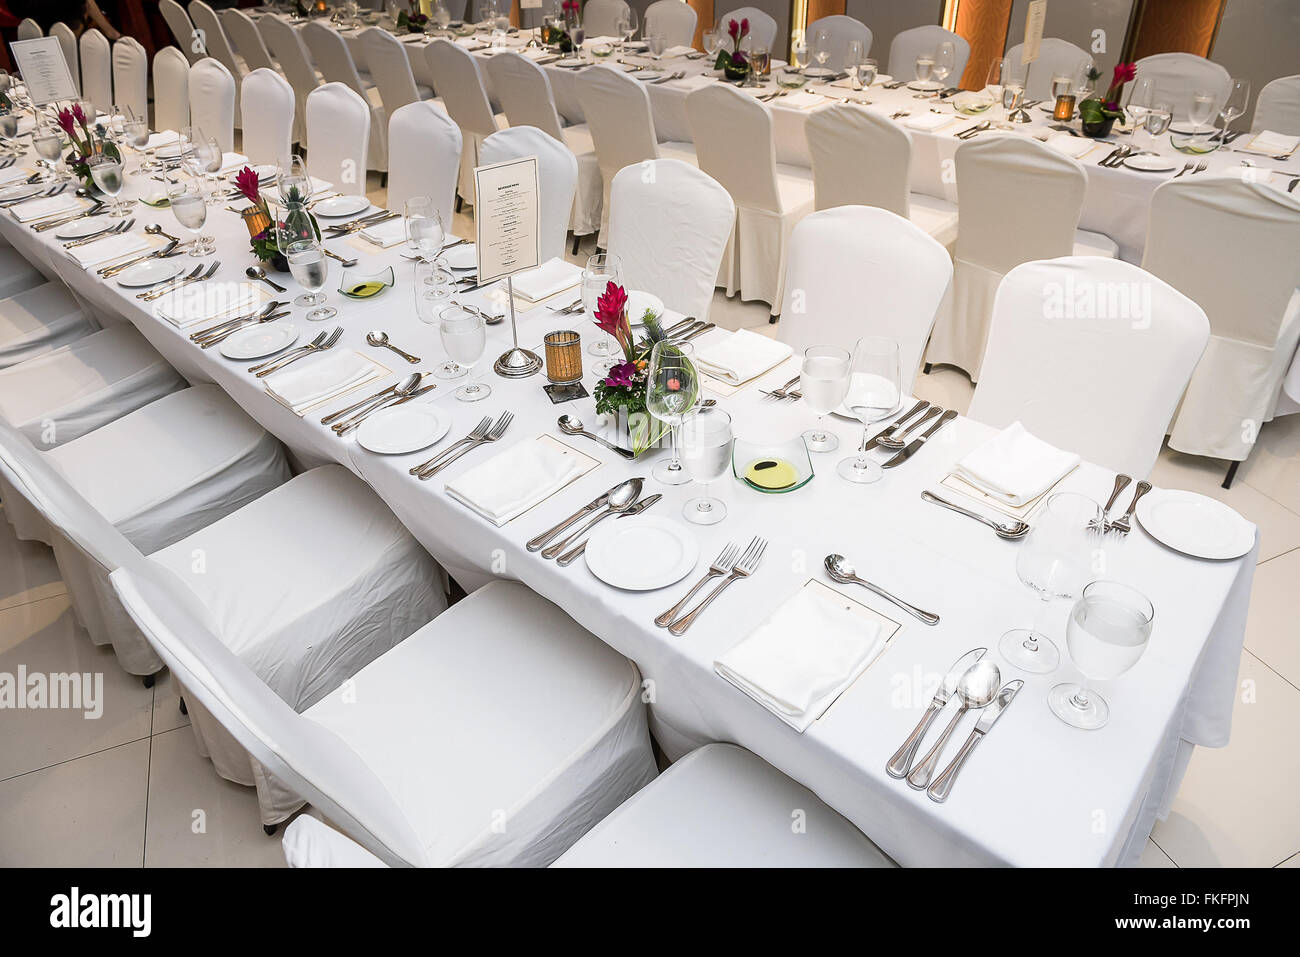 Luxurious table set up with plates and cutlery for dinner reception. Stock Photo